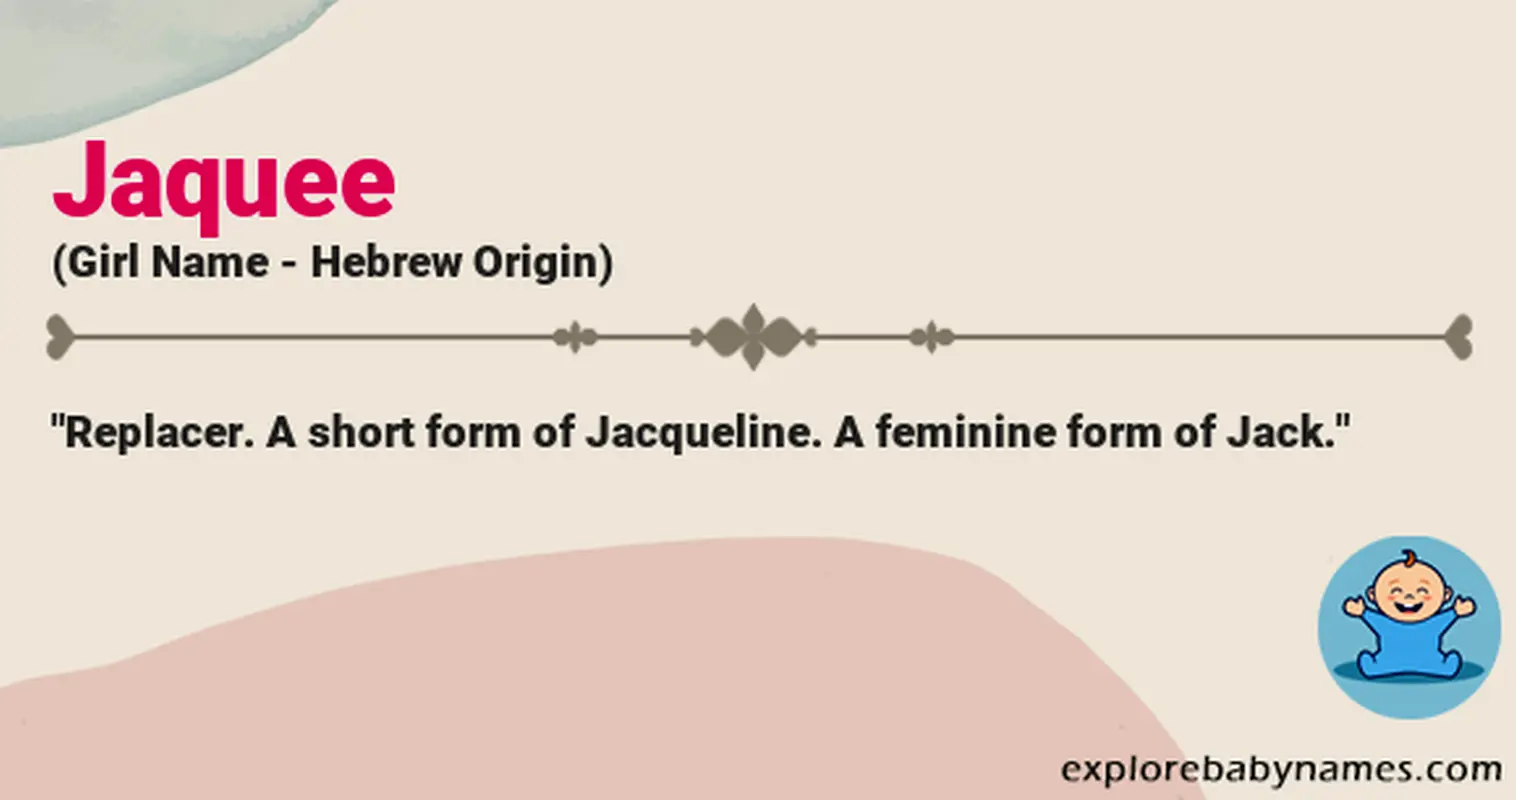 Meaning of Jaquee